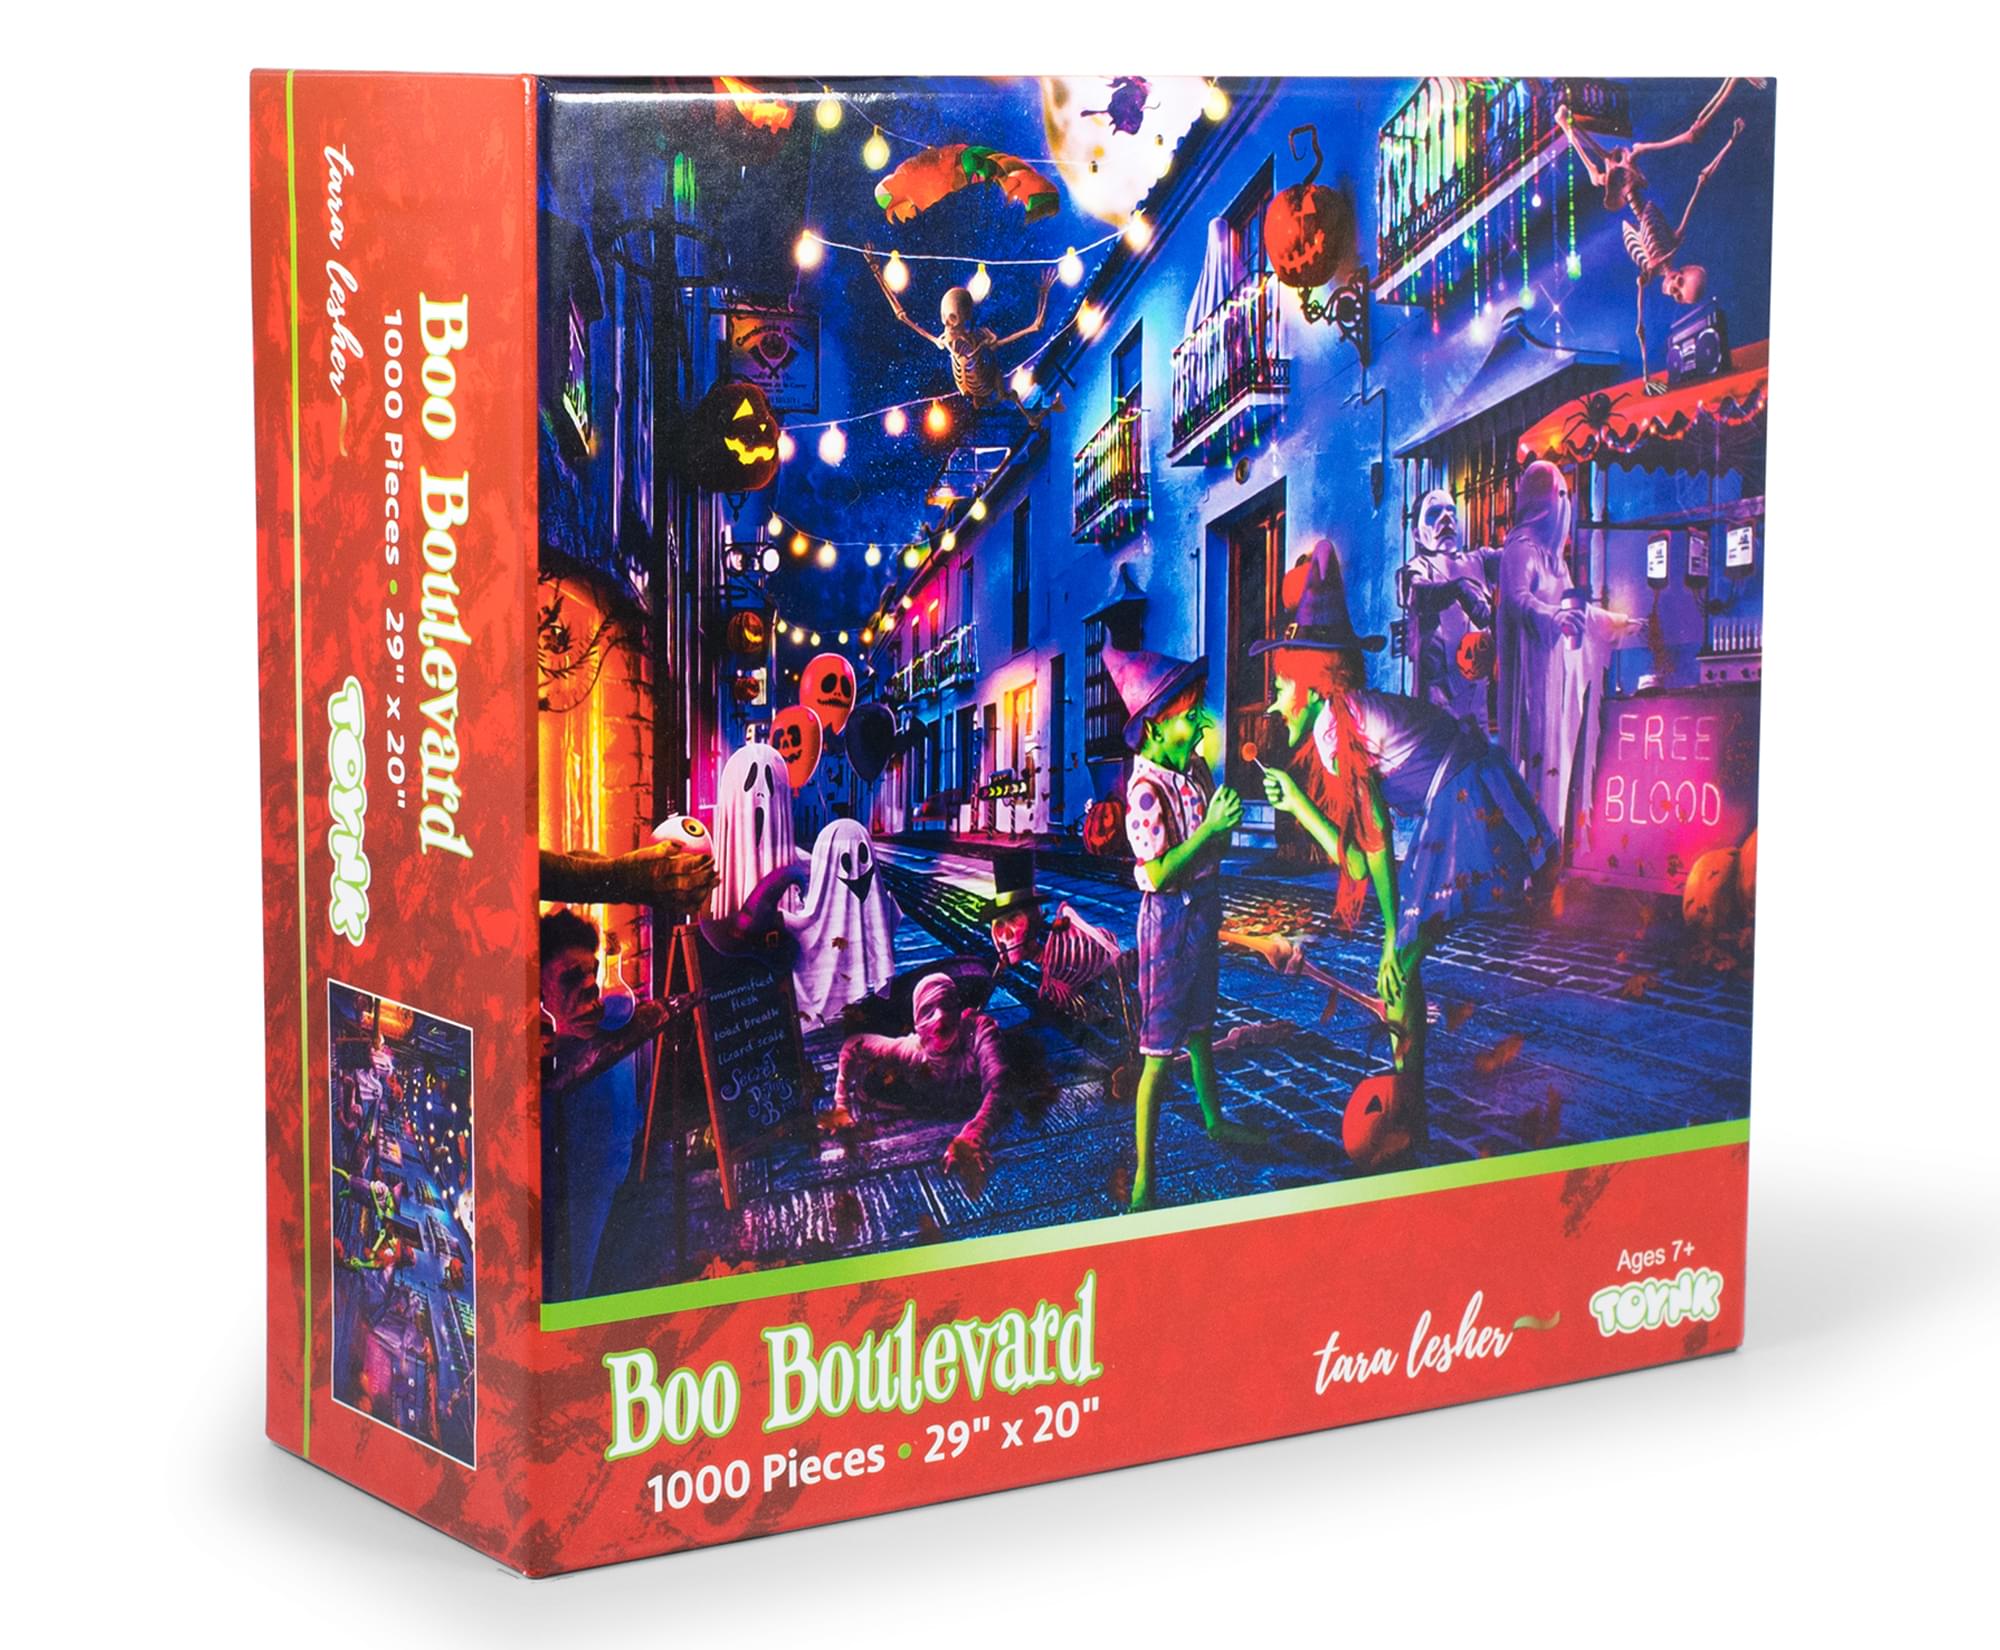 Boo Boulevard Halloween Puzzle by Tara Lesher | 1000 Piece Jigsaw Puzzle - image 2 of 7